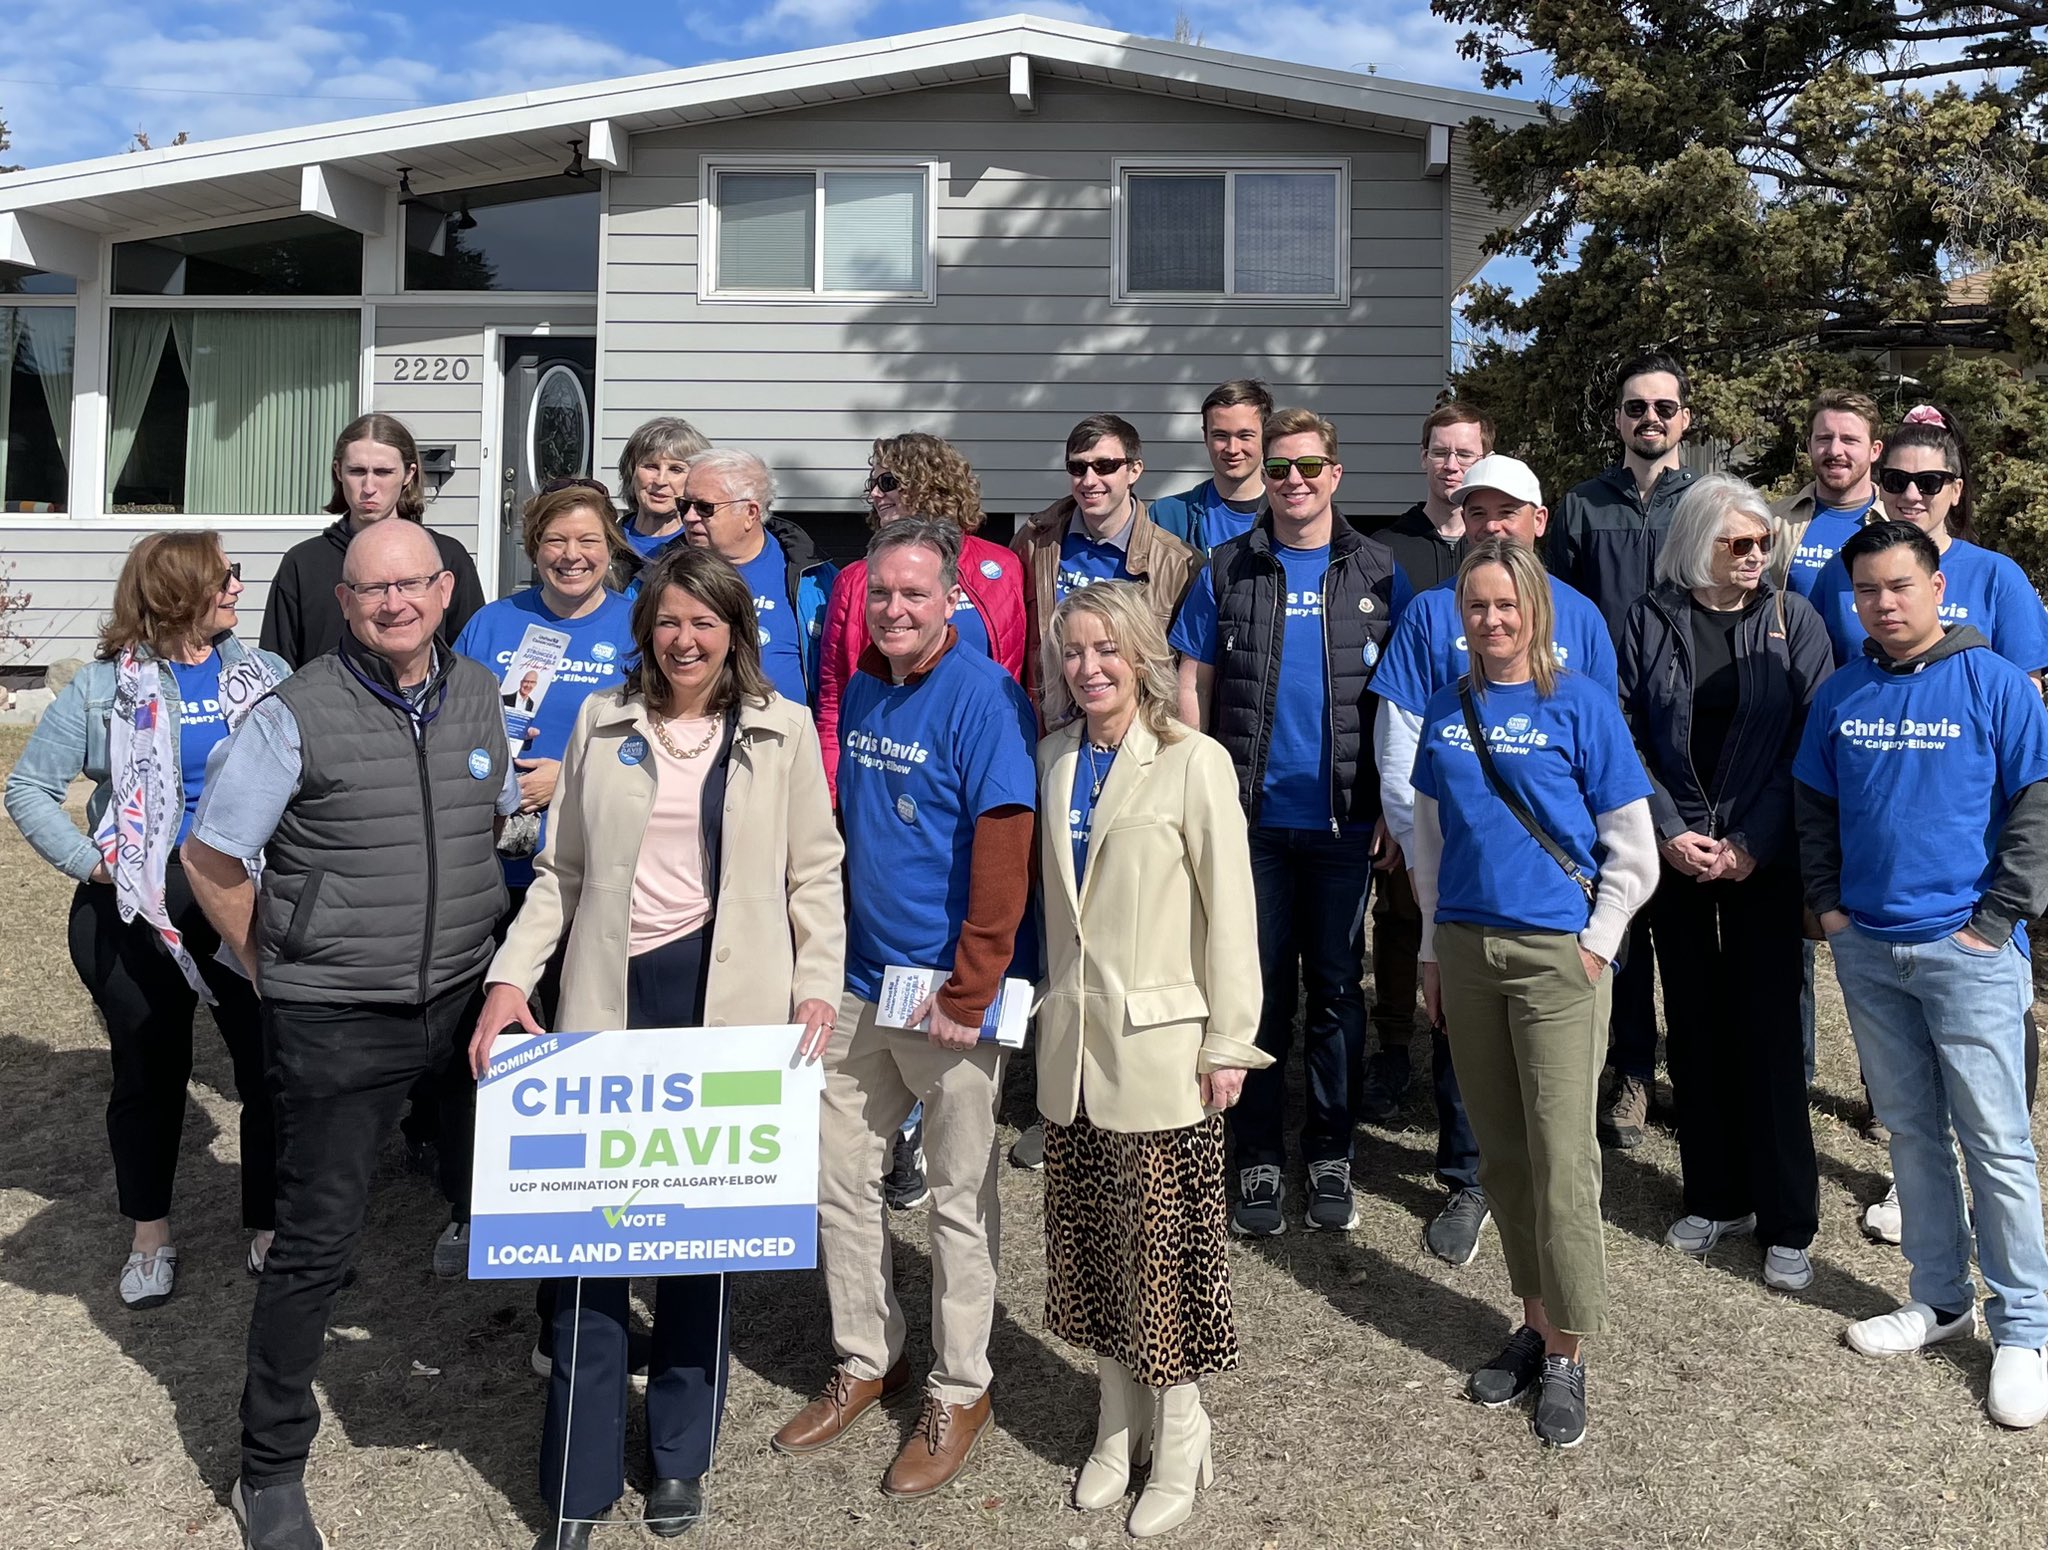 Chris Davis on X: A fantastic day at the doors in Calgary-Elbow, chatting  with neighbours and friends about the issues most important to them. Thank  you to all my volunteers who came